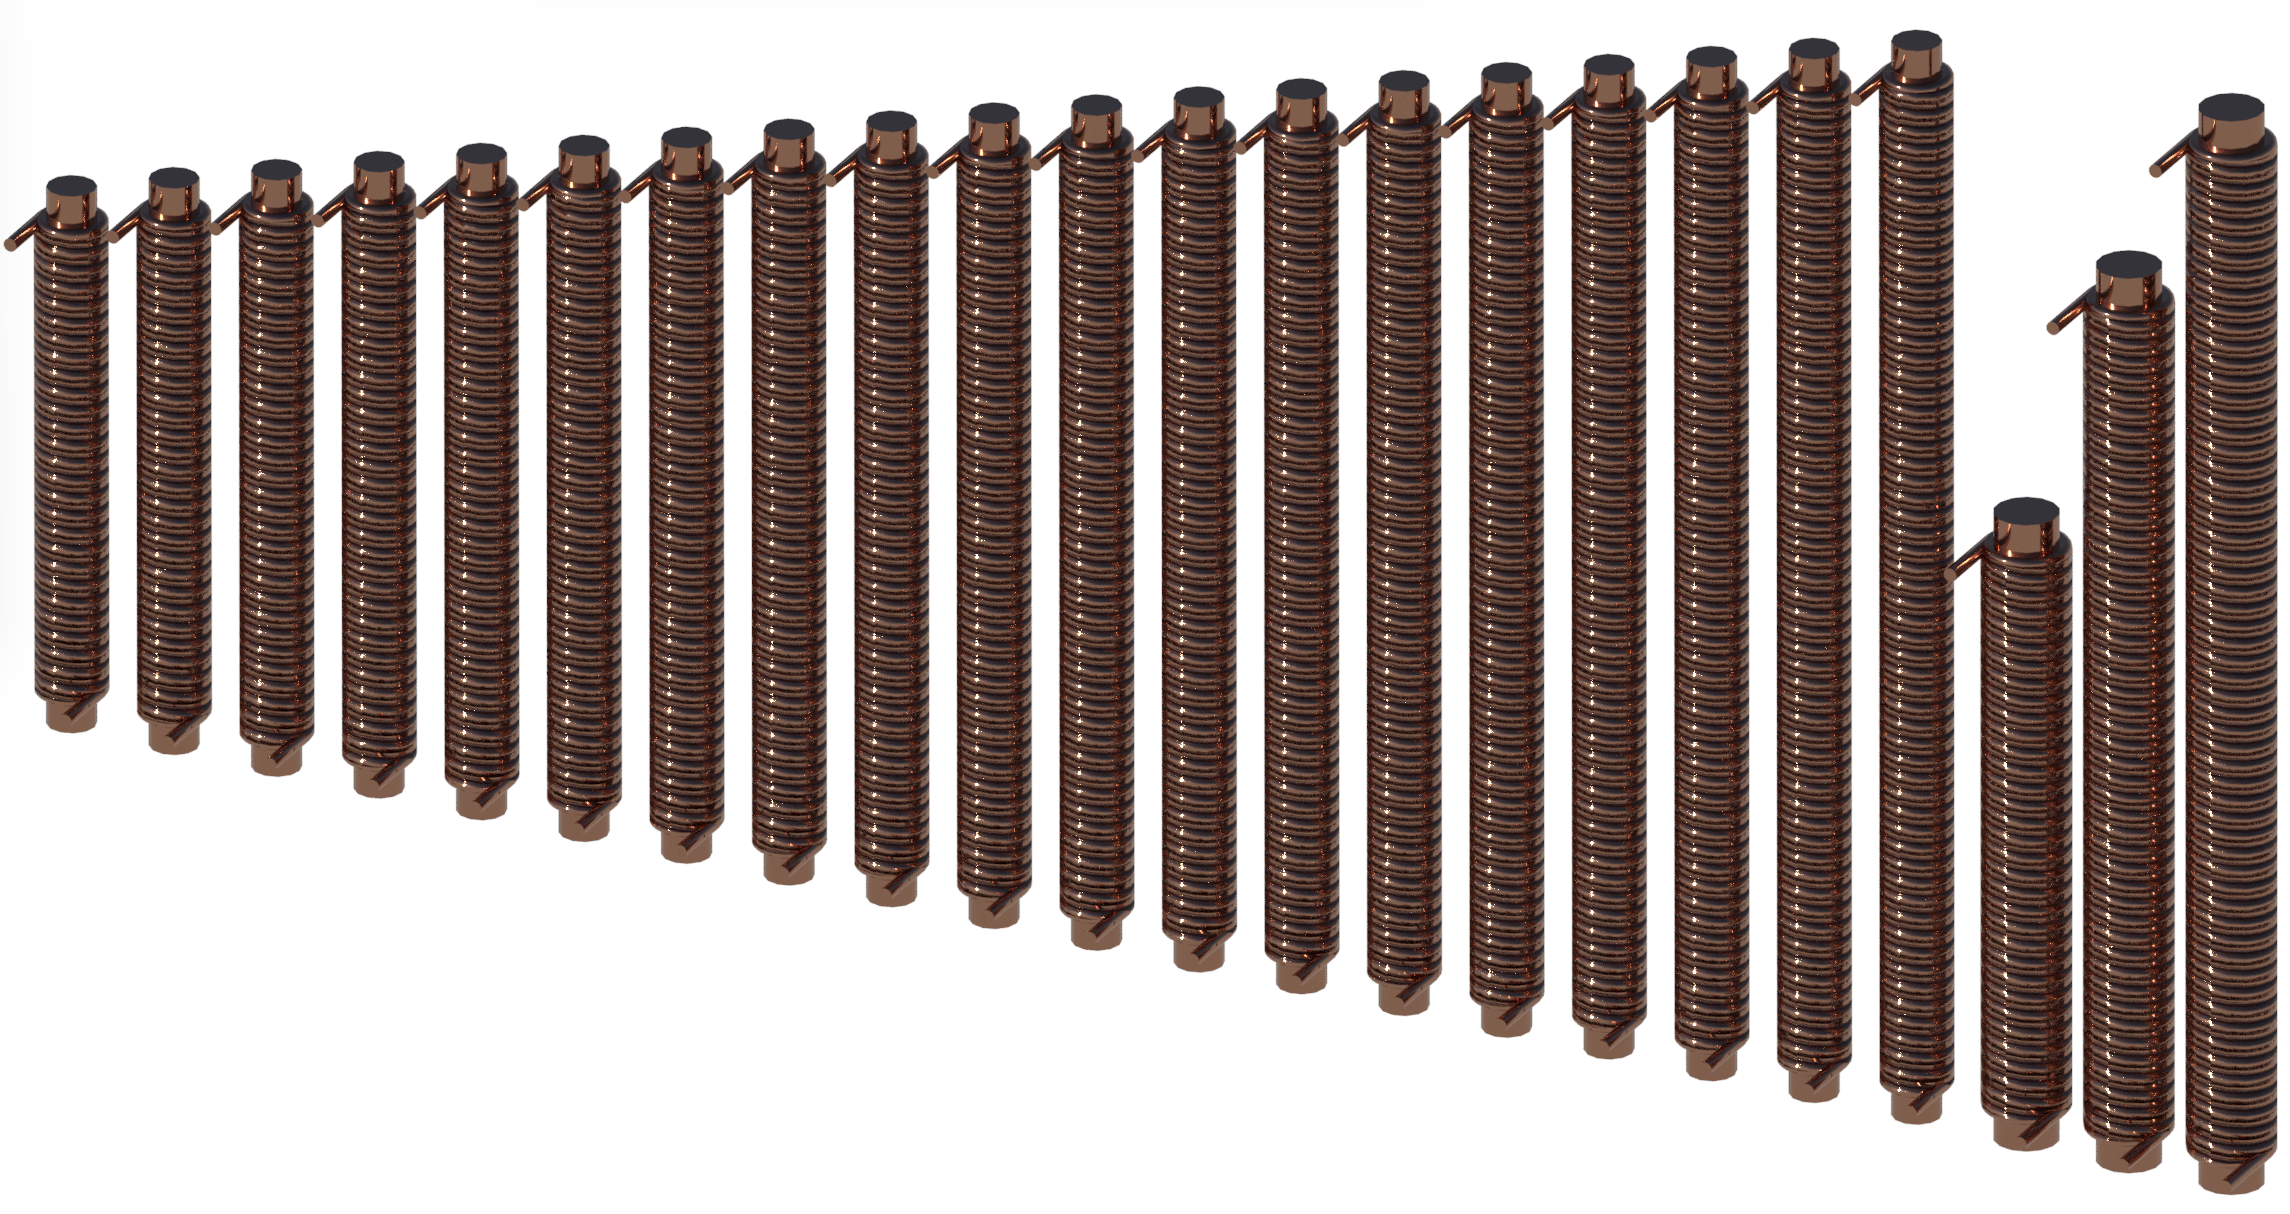 Render of 22 types of the heat exchanger, varying in height.